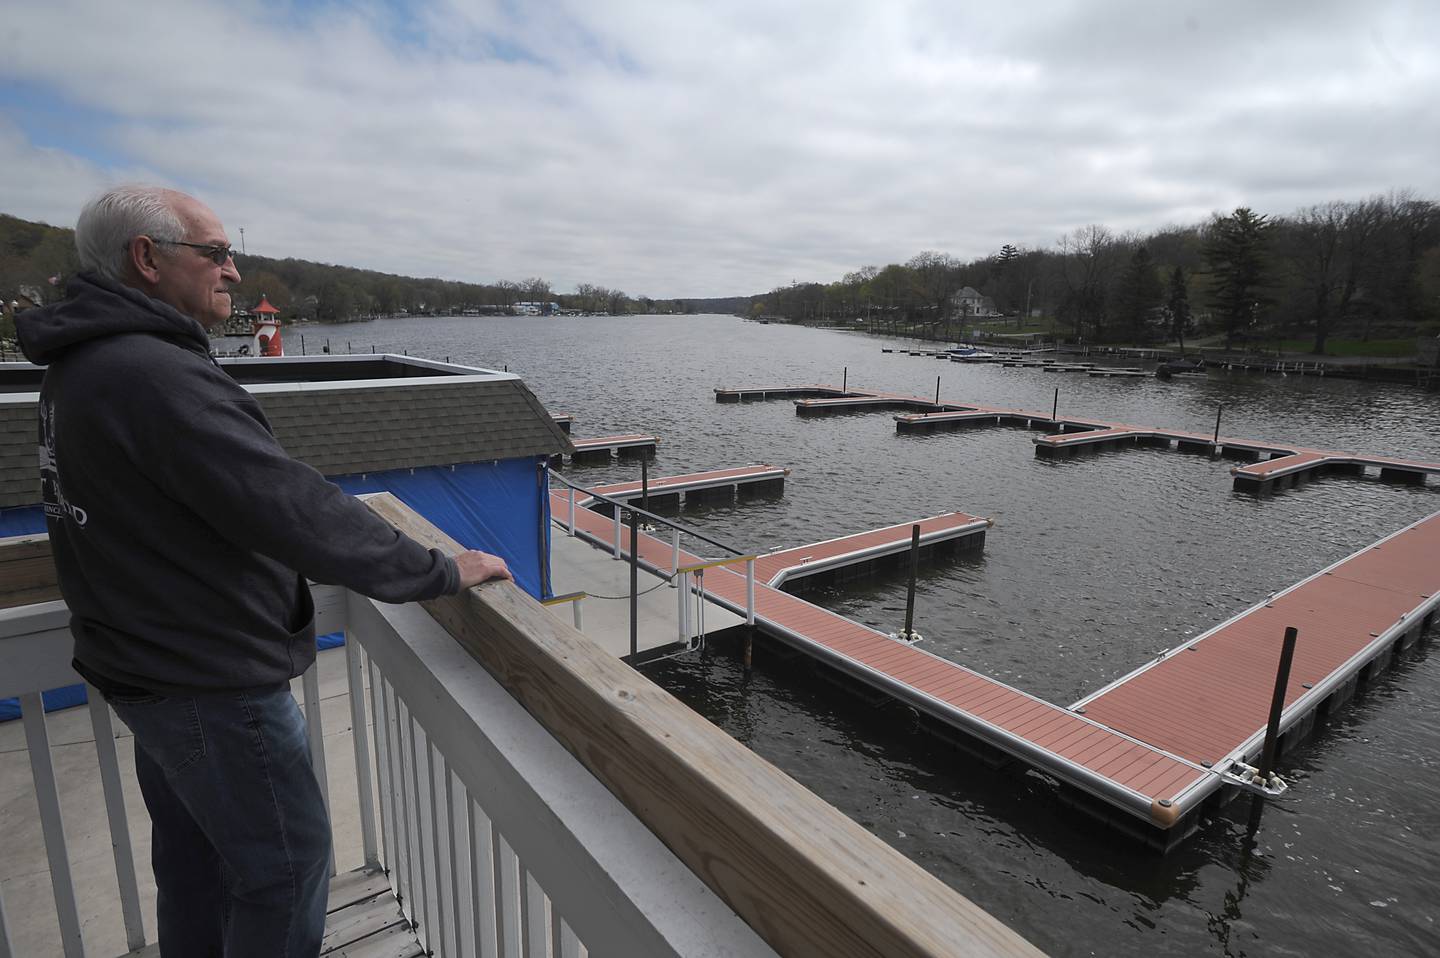 Scott Pucket looks over the the docks for boaters on Wednesday, May 4, 2022, at Port Edwards, 20 W. Algonquin Road in Algonquin. With warmer weather in the forecast, Port Edwards is busily preparing for the upcoming summer boating season.